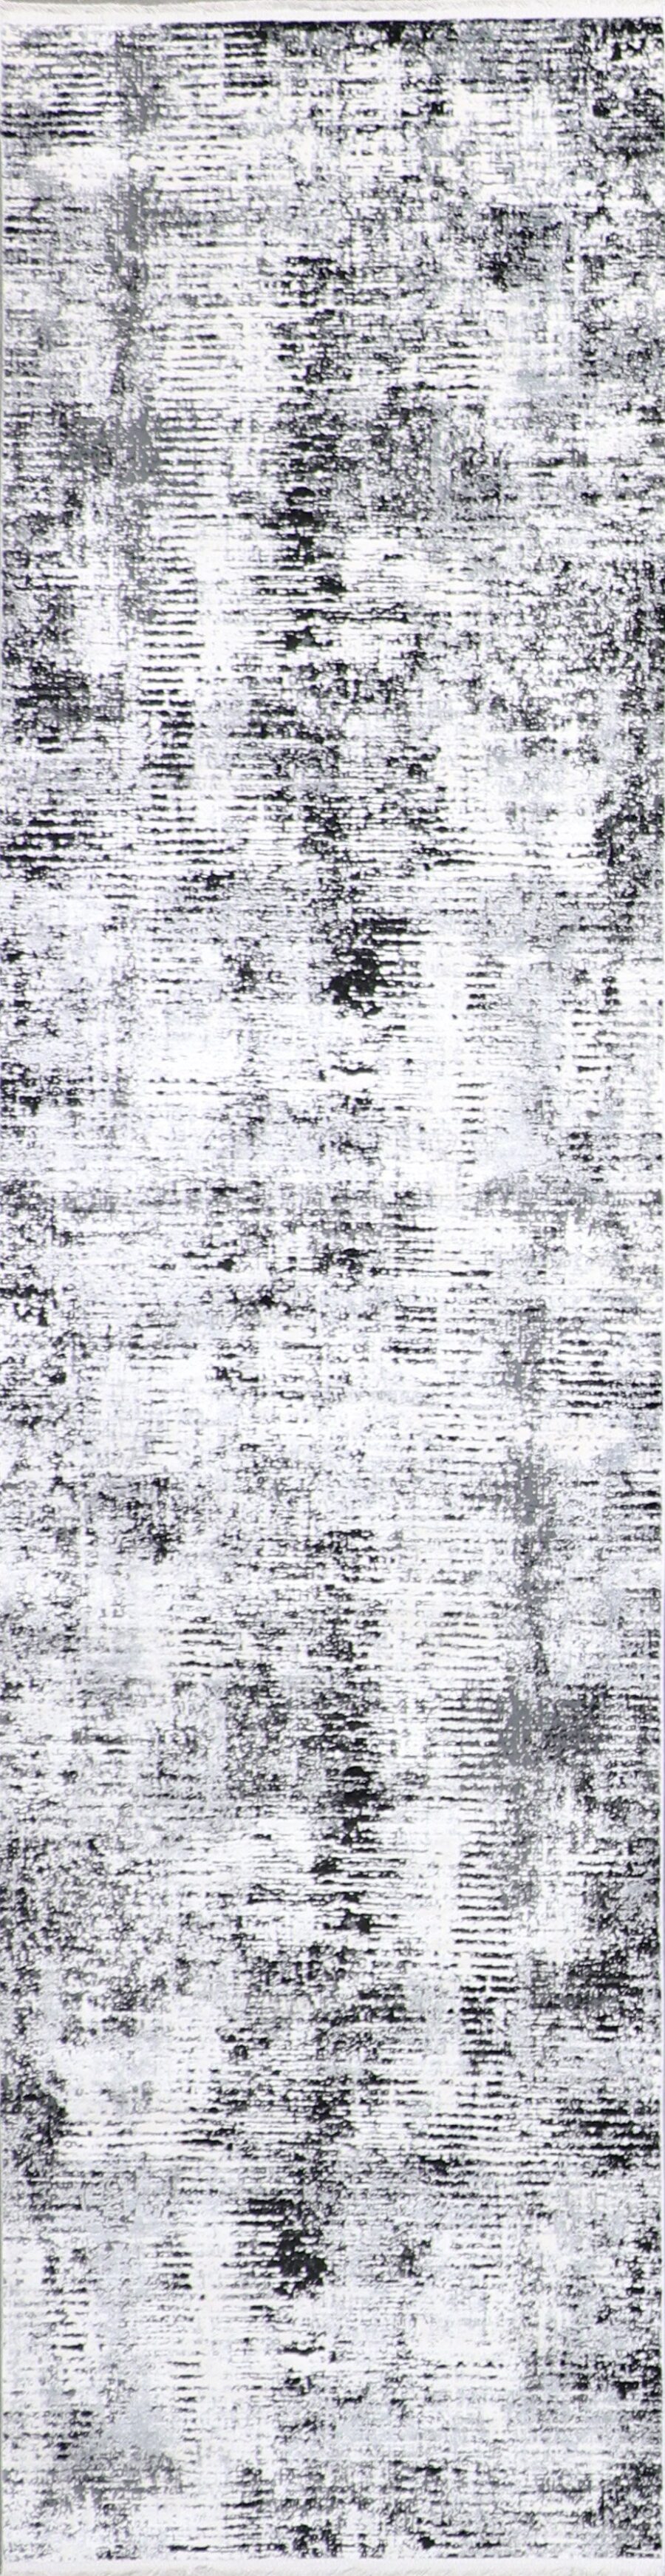 2’7”x10’ Contemporary Gray Wool & Silk Hand-Finished Rug - Direct Rug Import | Rugs in Chicago, Indiana,South Bend,Granger